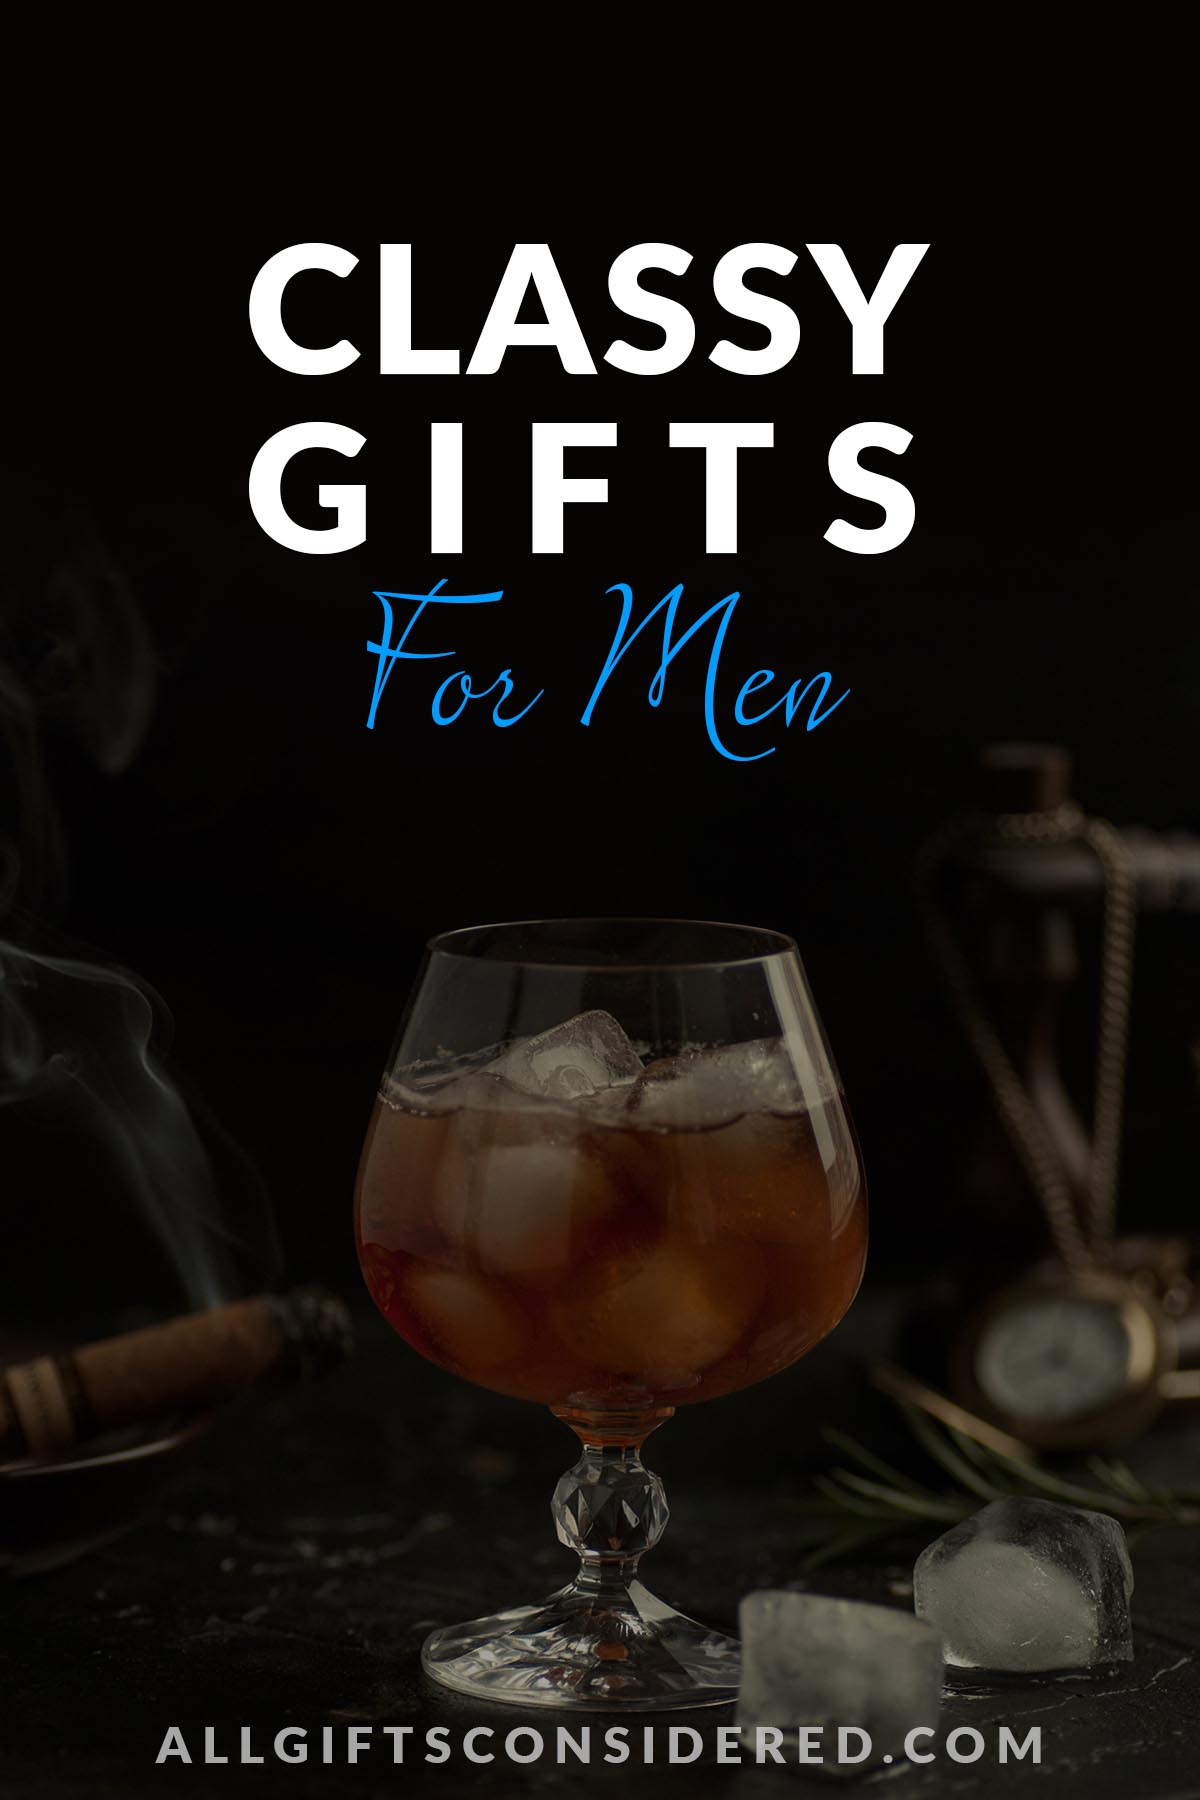 classy gifts for men - feature image